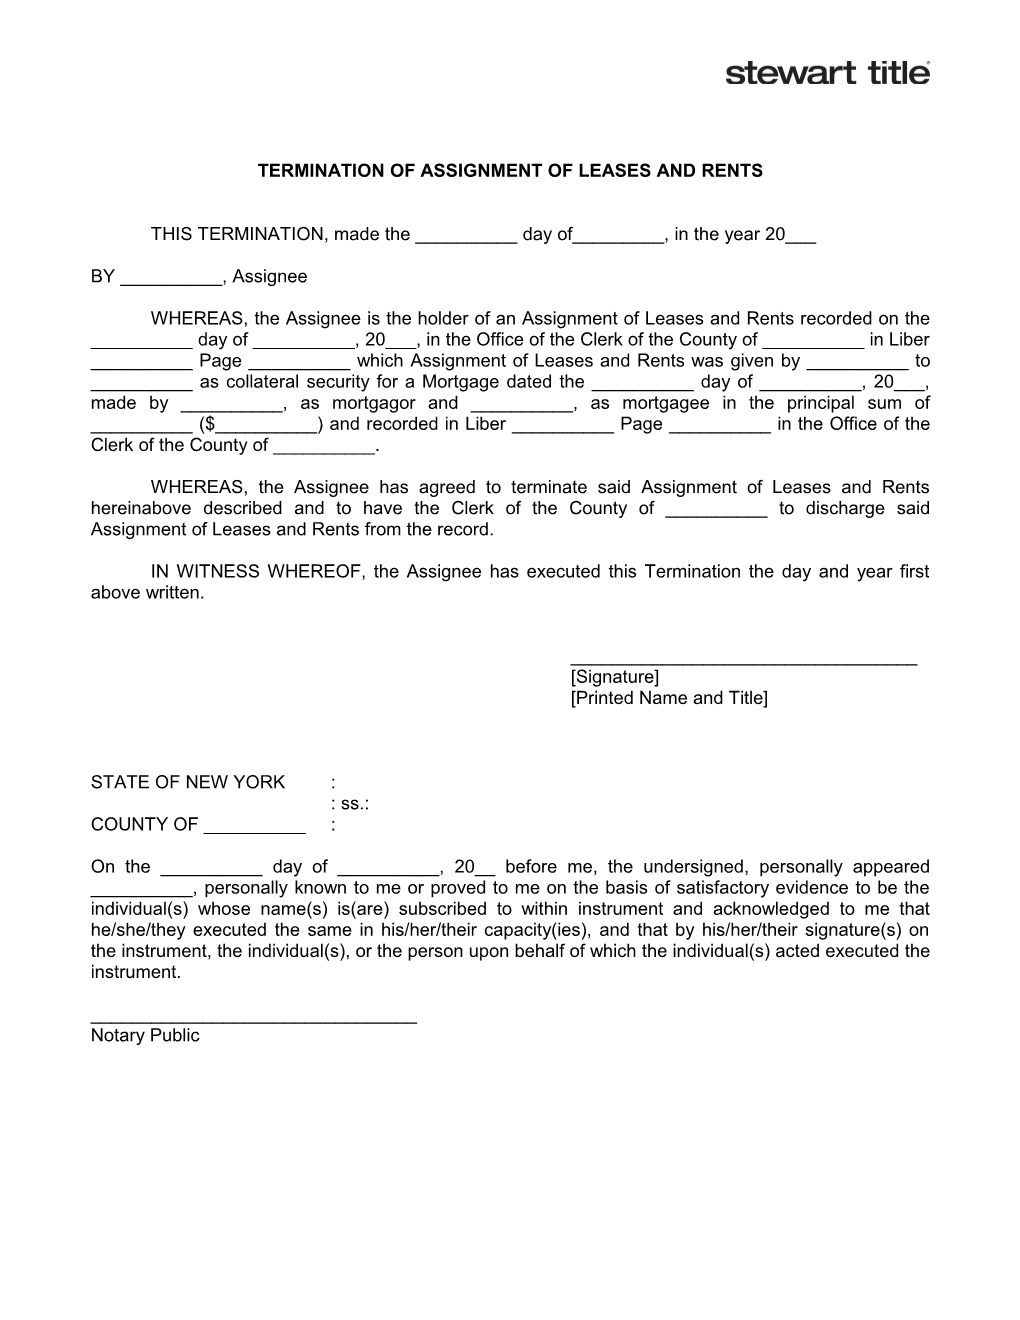 Termination of Assignment of Leases and Rents